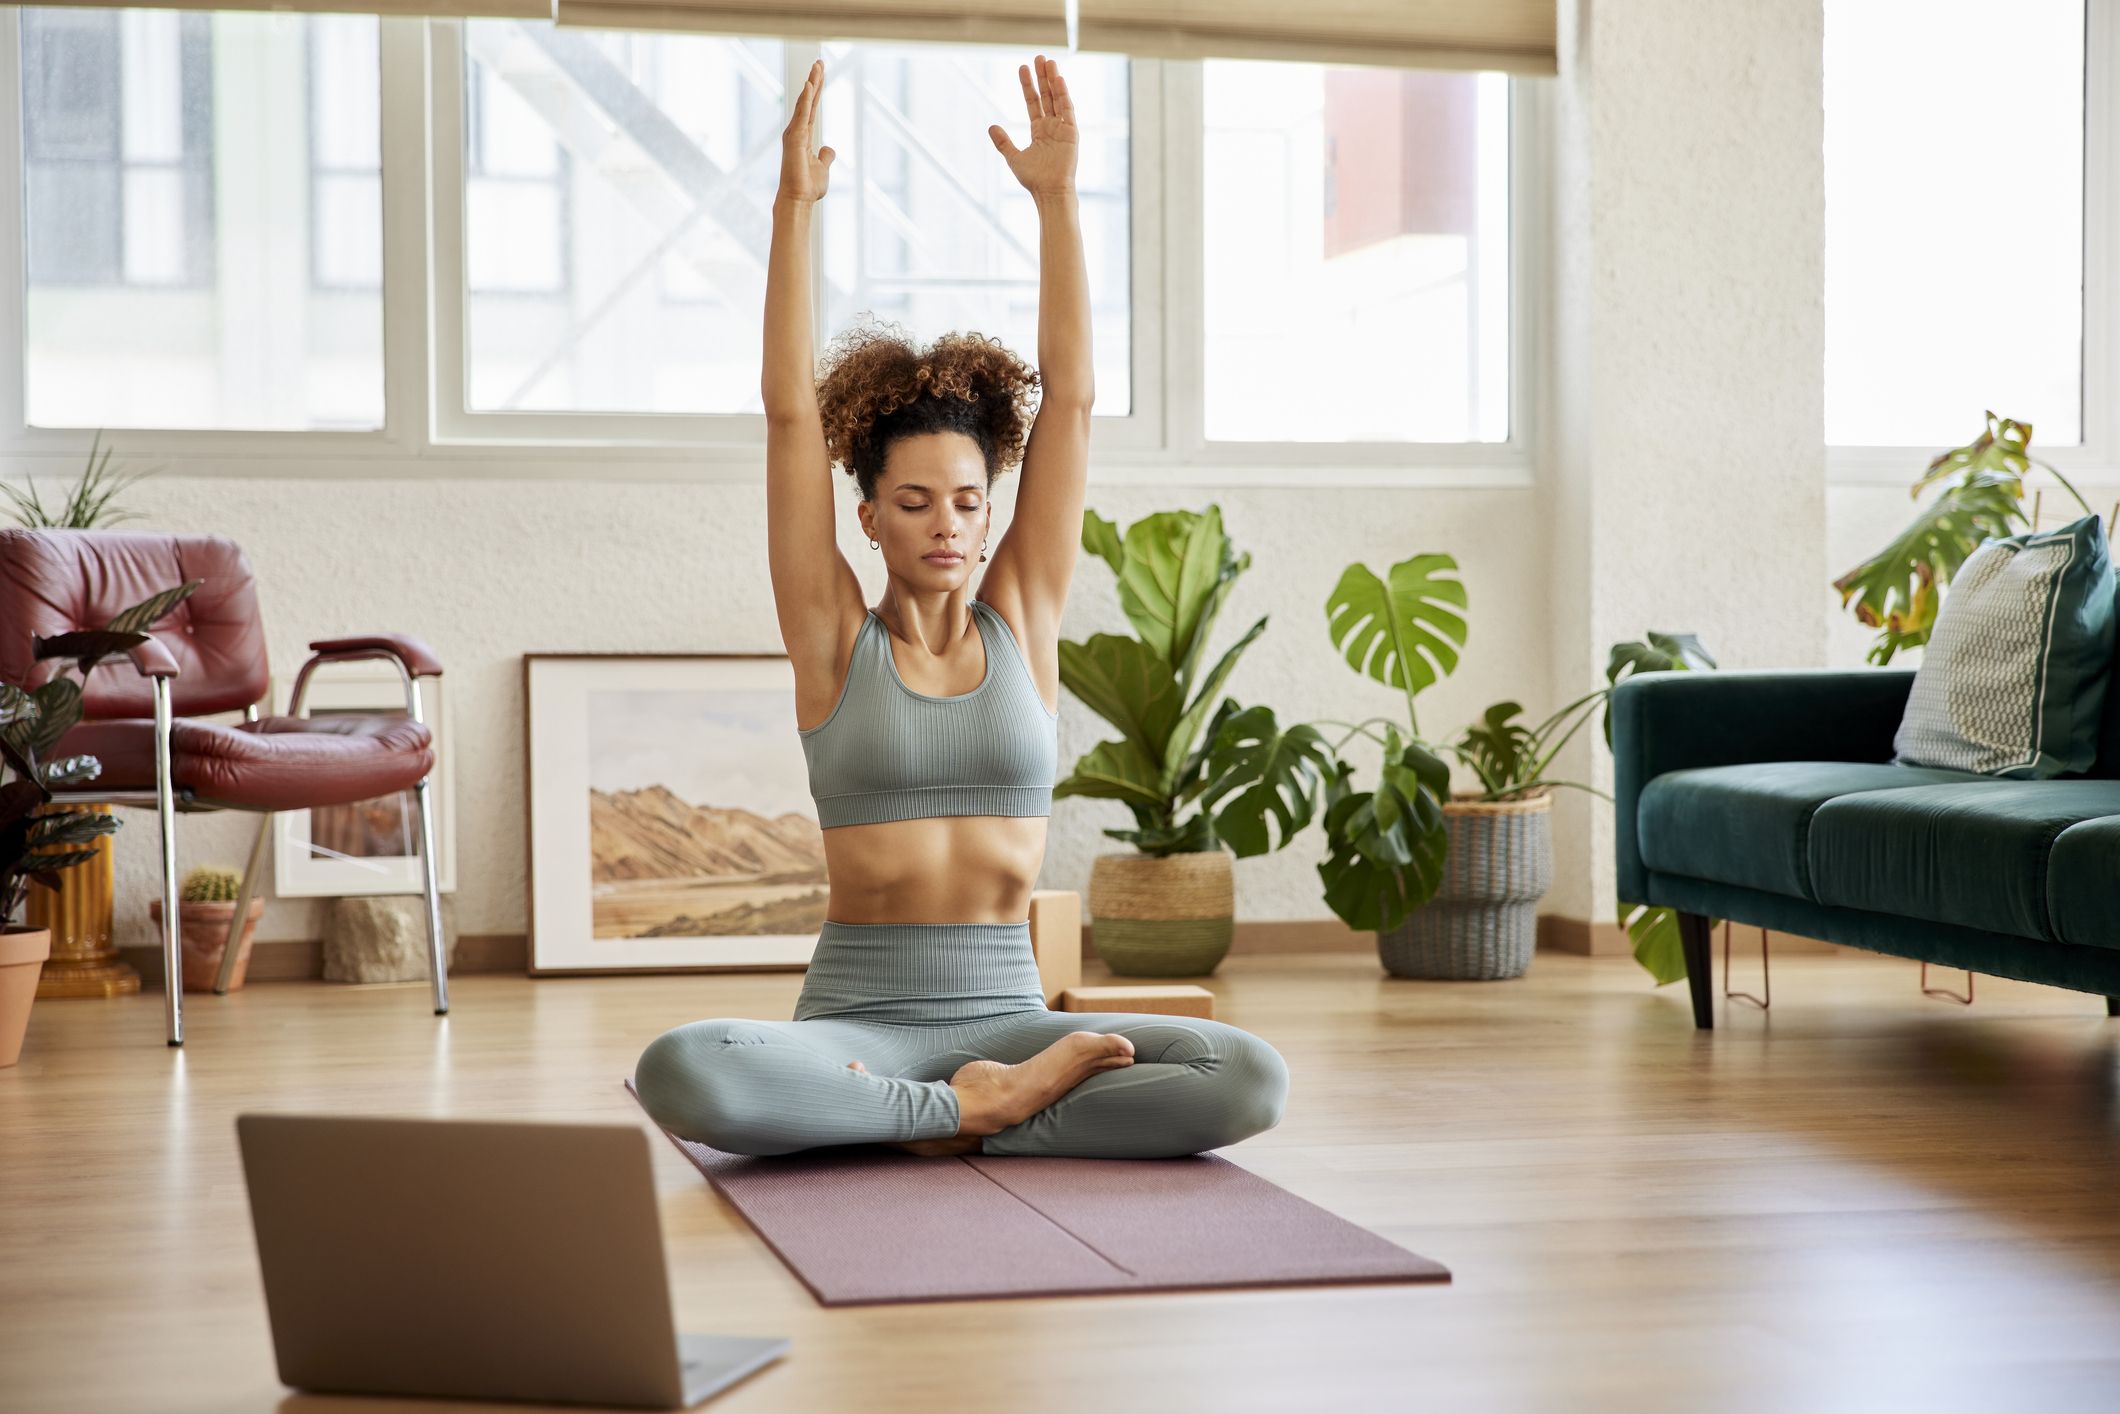 Yoga stretches: 10 best stretches to relieve stress and tension and improve flexibility